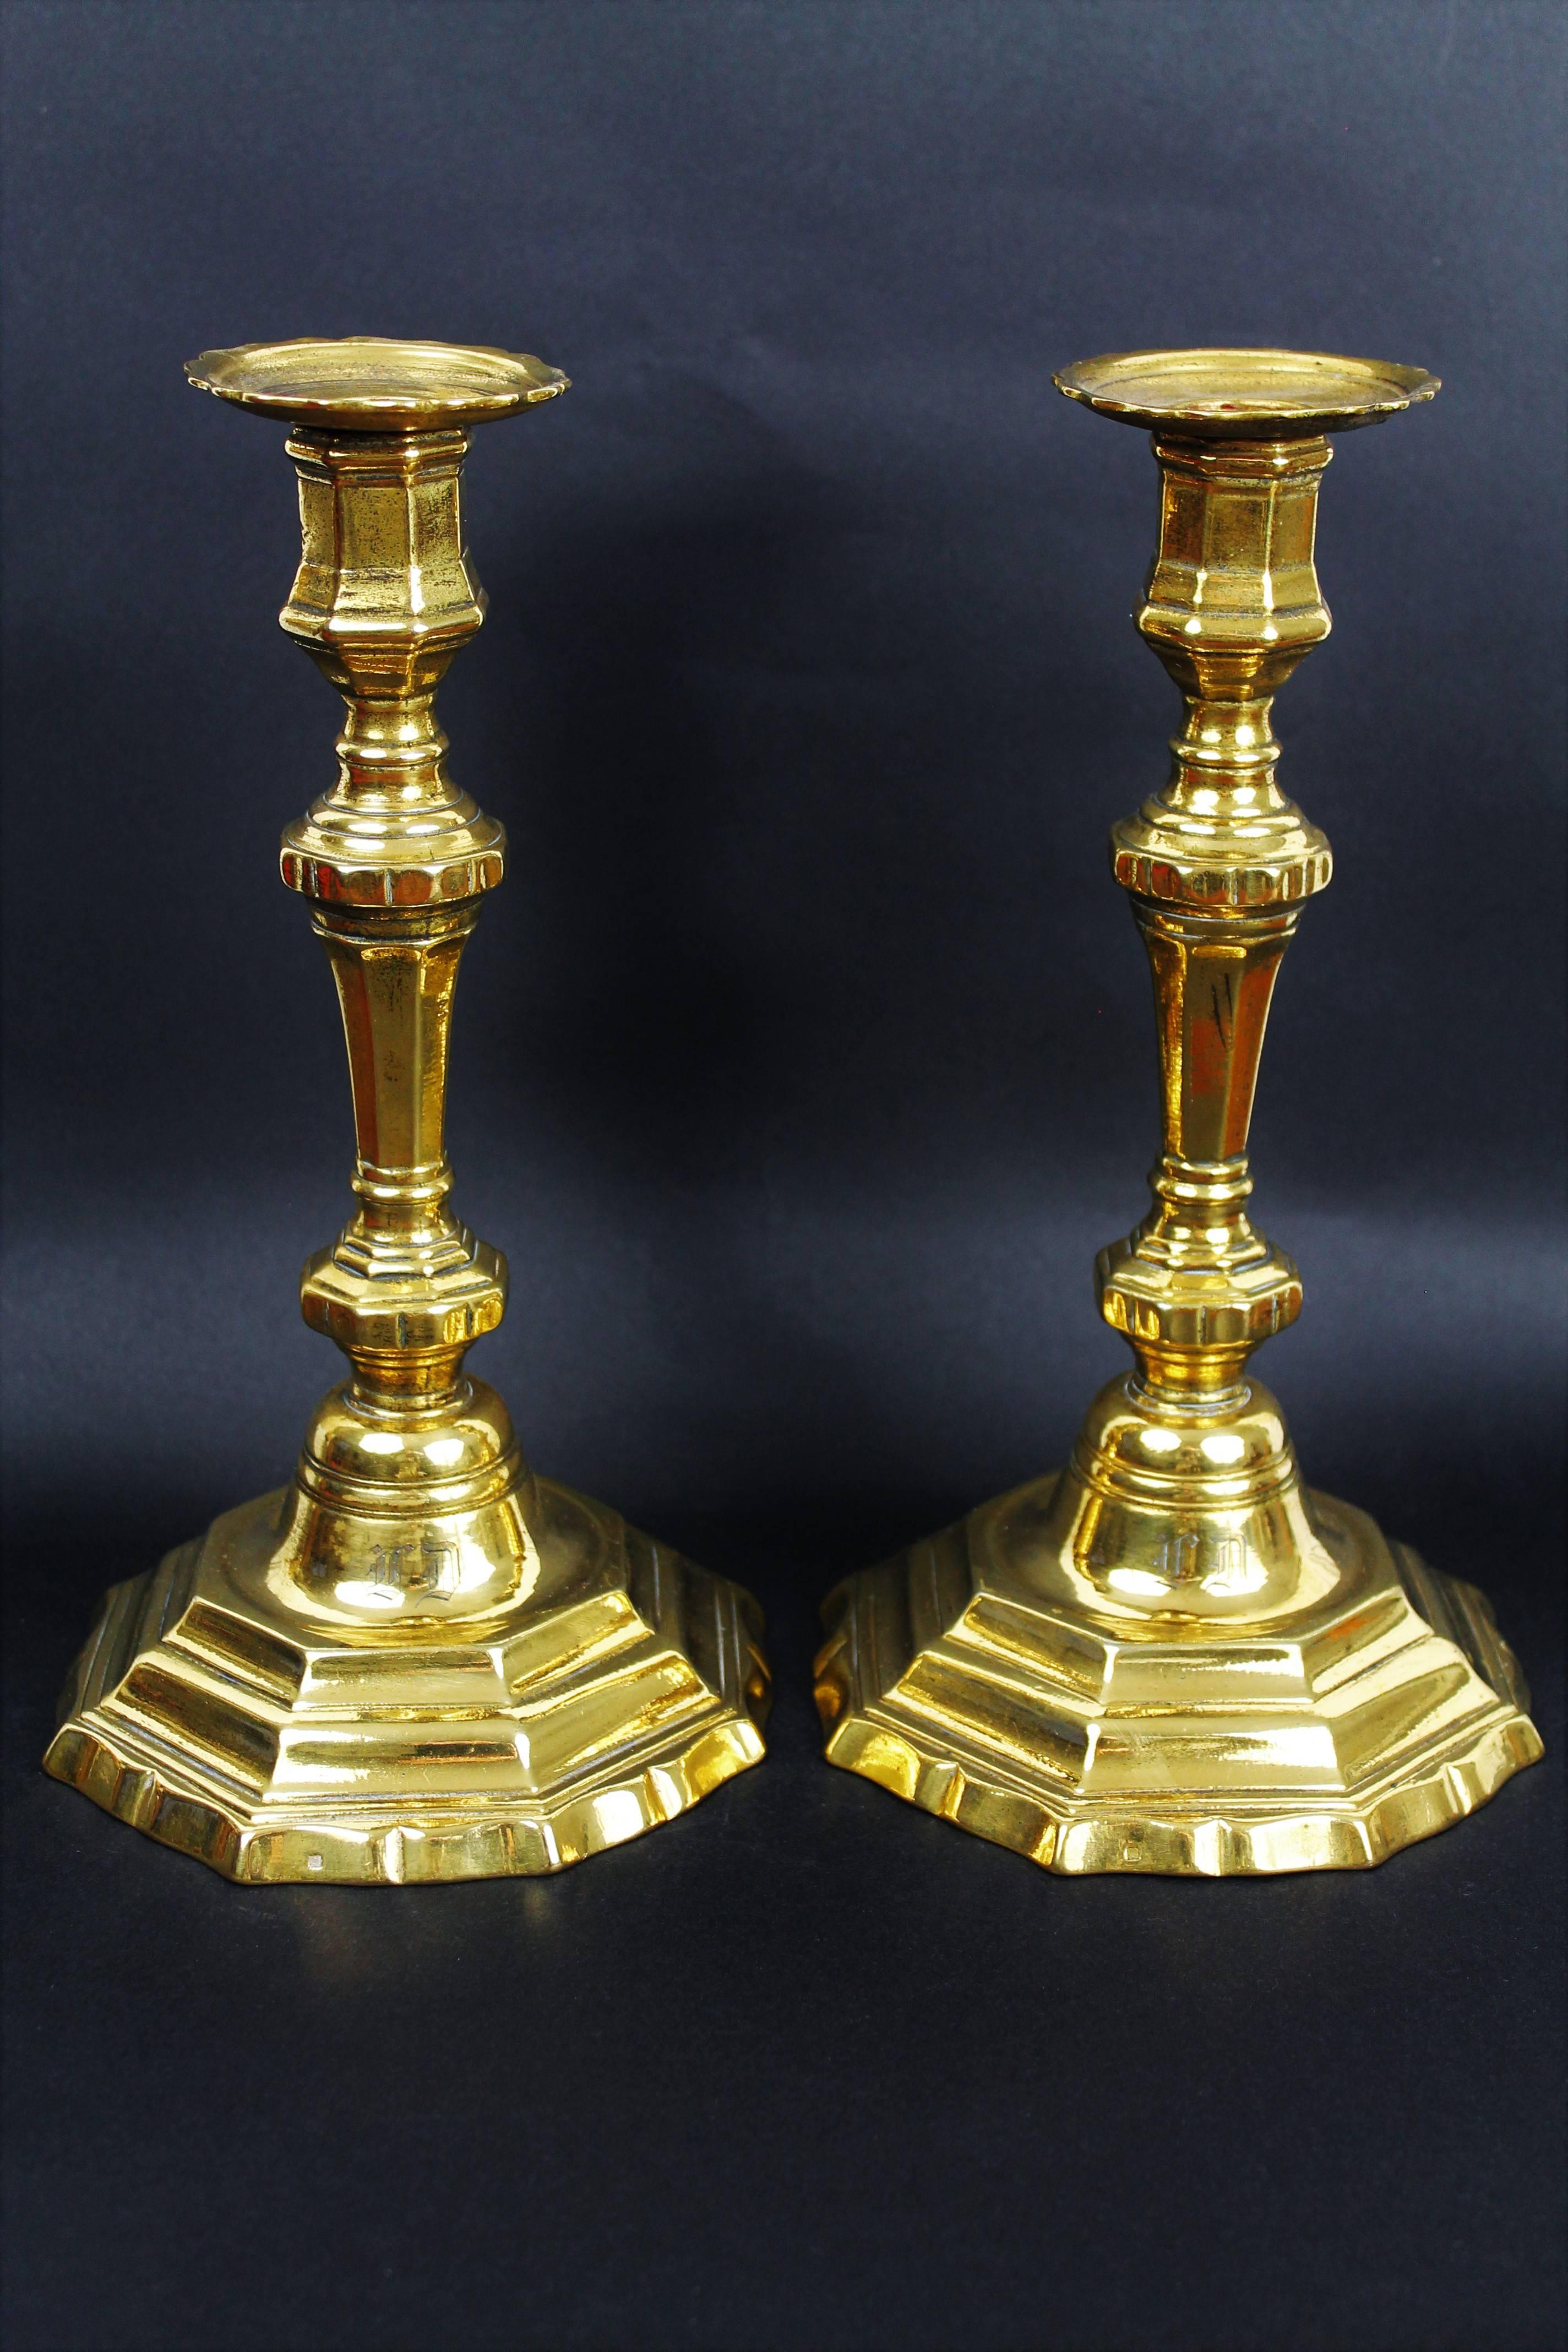 Pair of bronze candlesticks in Louis XVI style with a monogram on the base in Gothic letters,
France,
19th century.